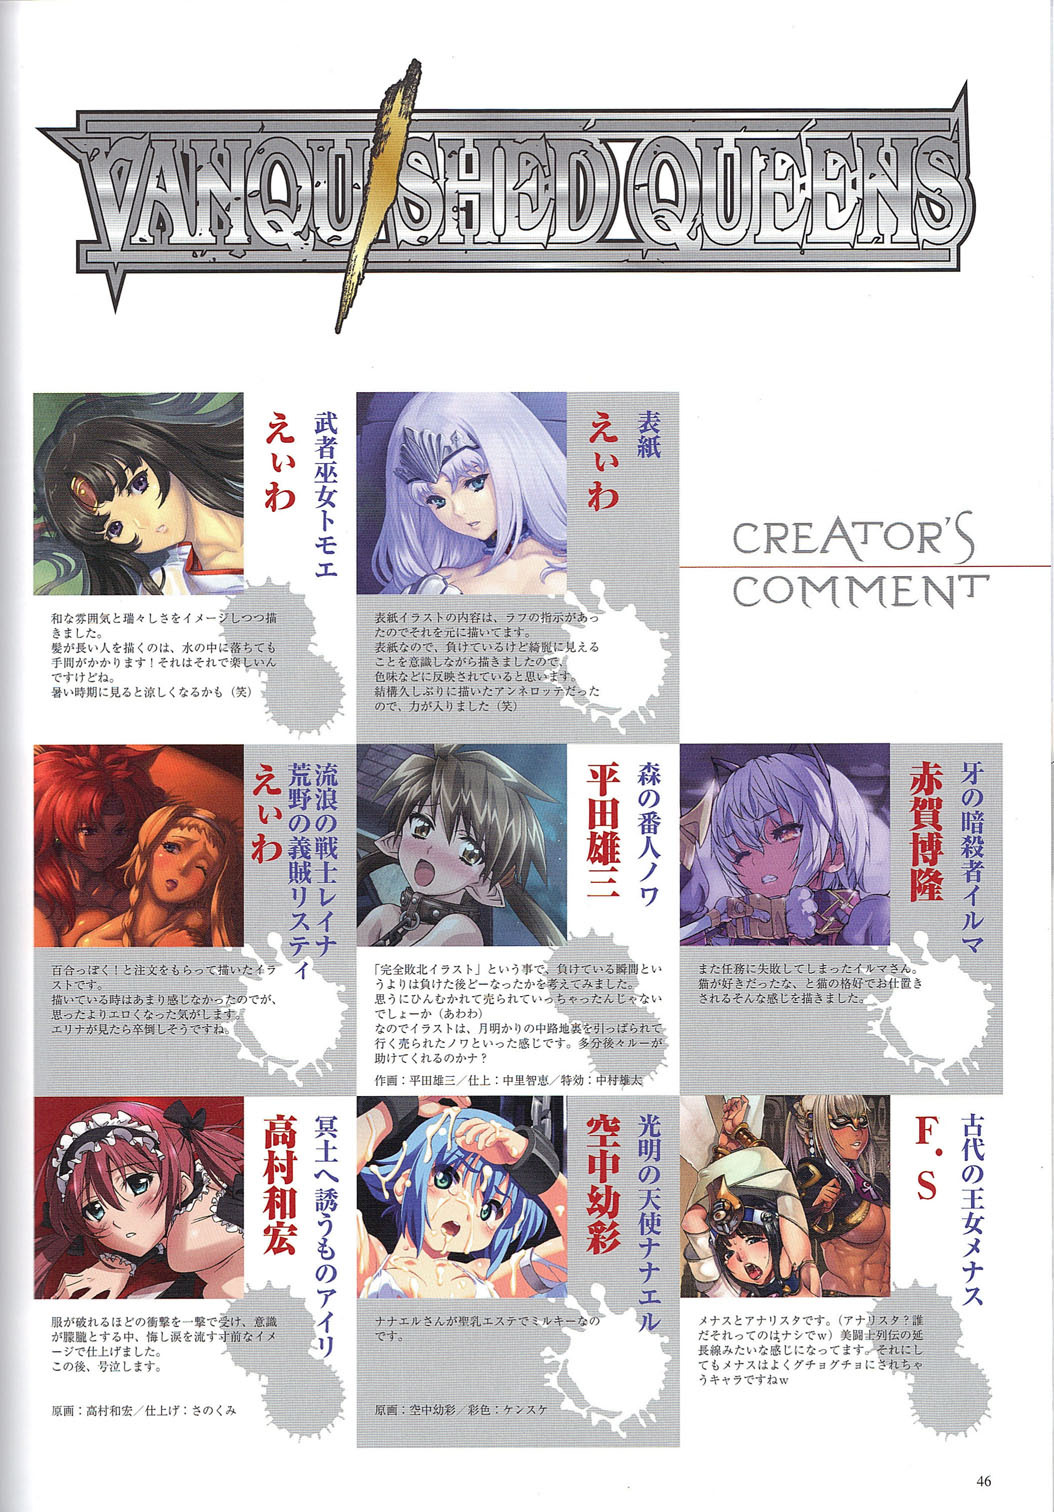 [Hobby JAPAN (Various)] Queen's Blade Kanzen Haiboku Gashuu Vanquished Queens 3 (Queen's Blade) [Incomplete] page 25 full